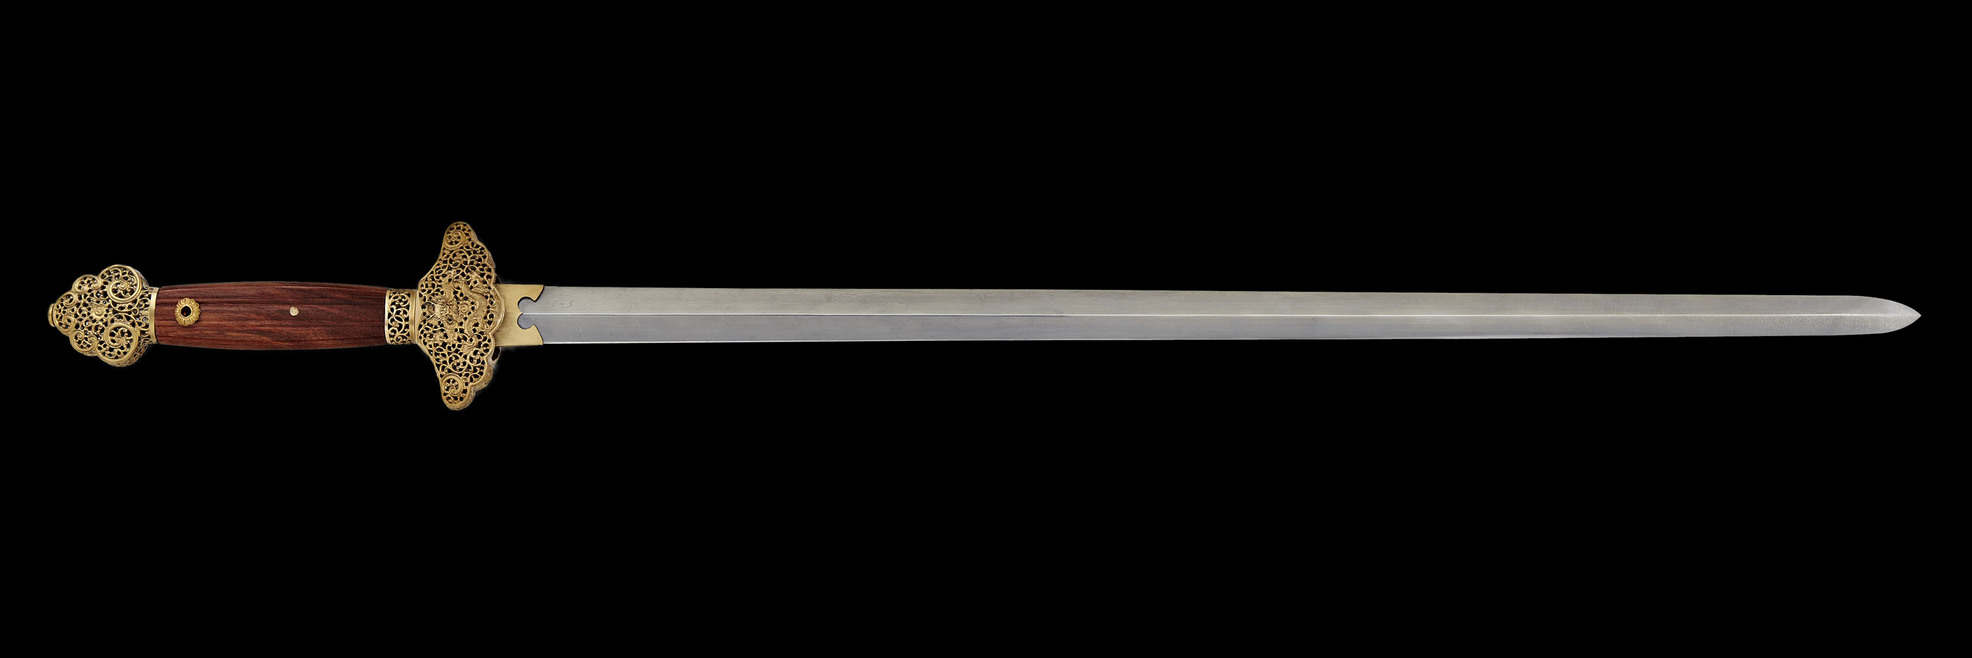 Qianglong Imperial Sword